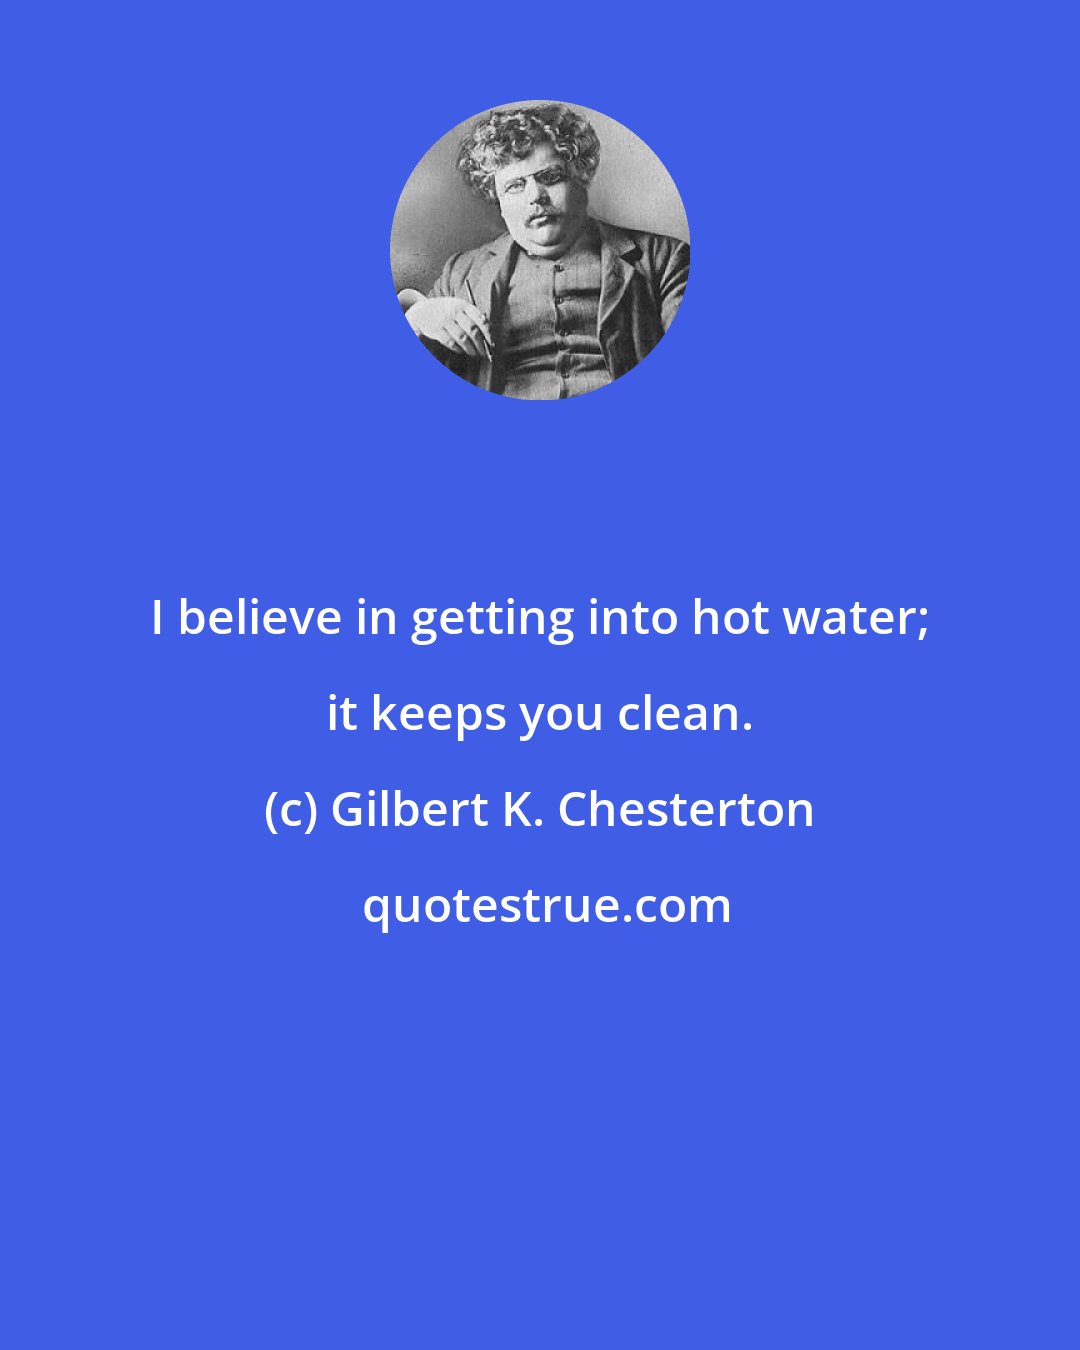 Gilbert K. Chesterton: I believe in getting into hot water; it keeps you clean.